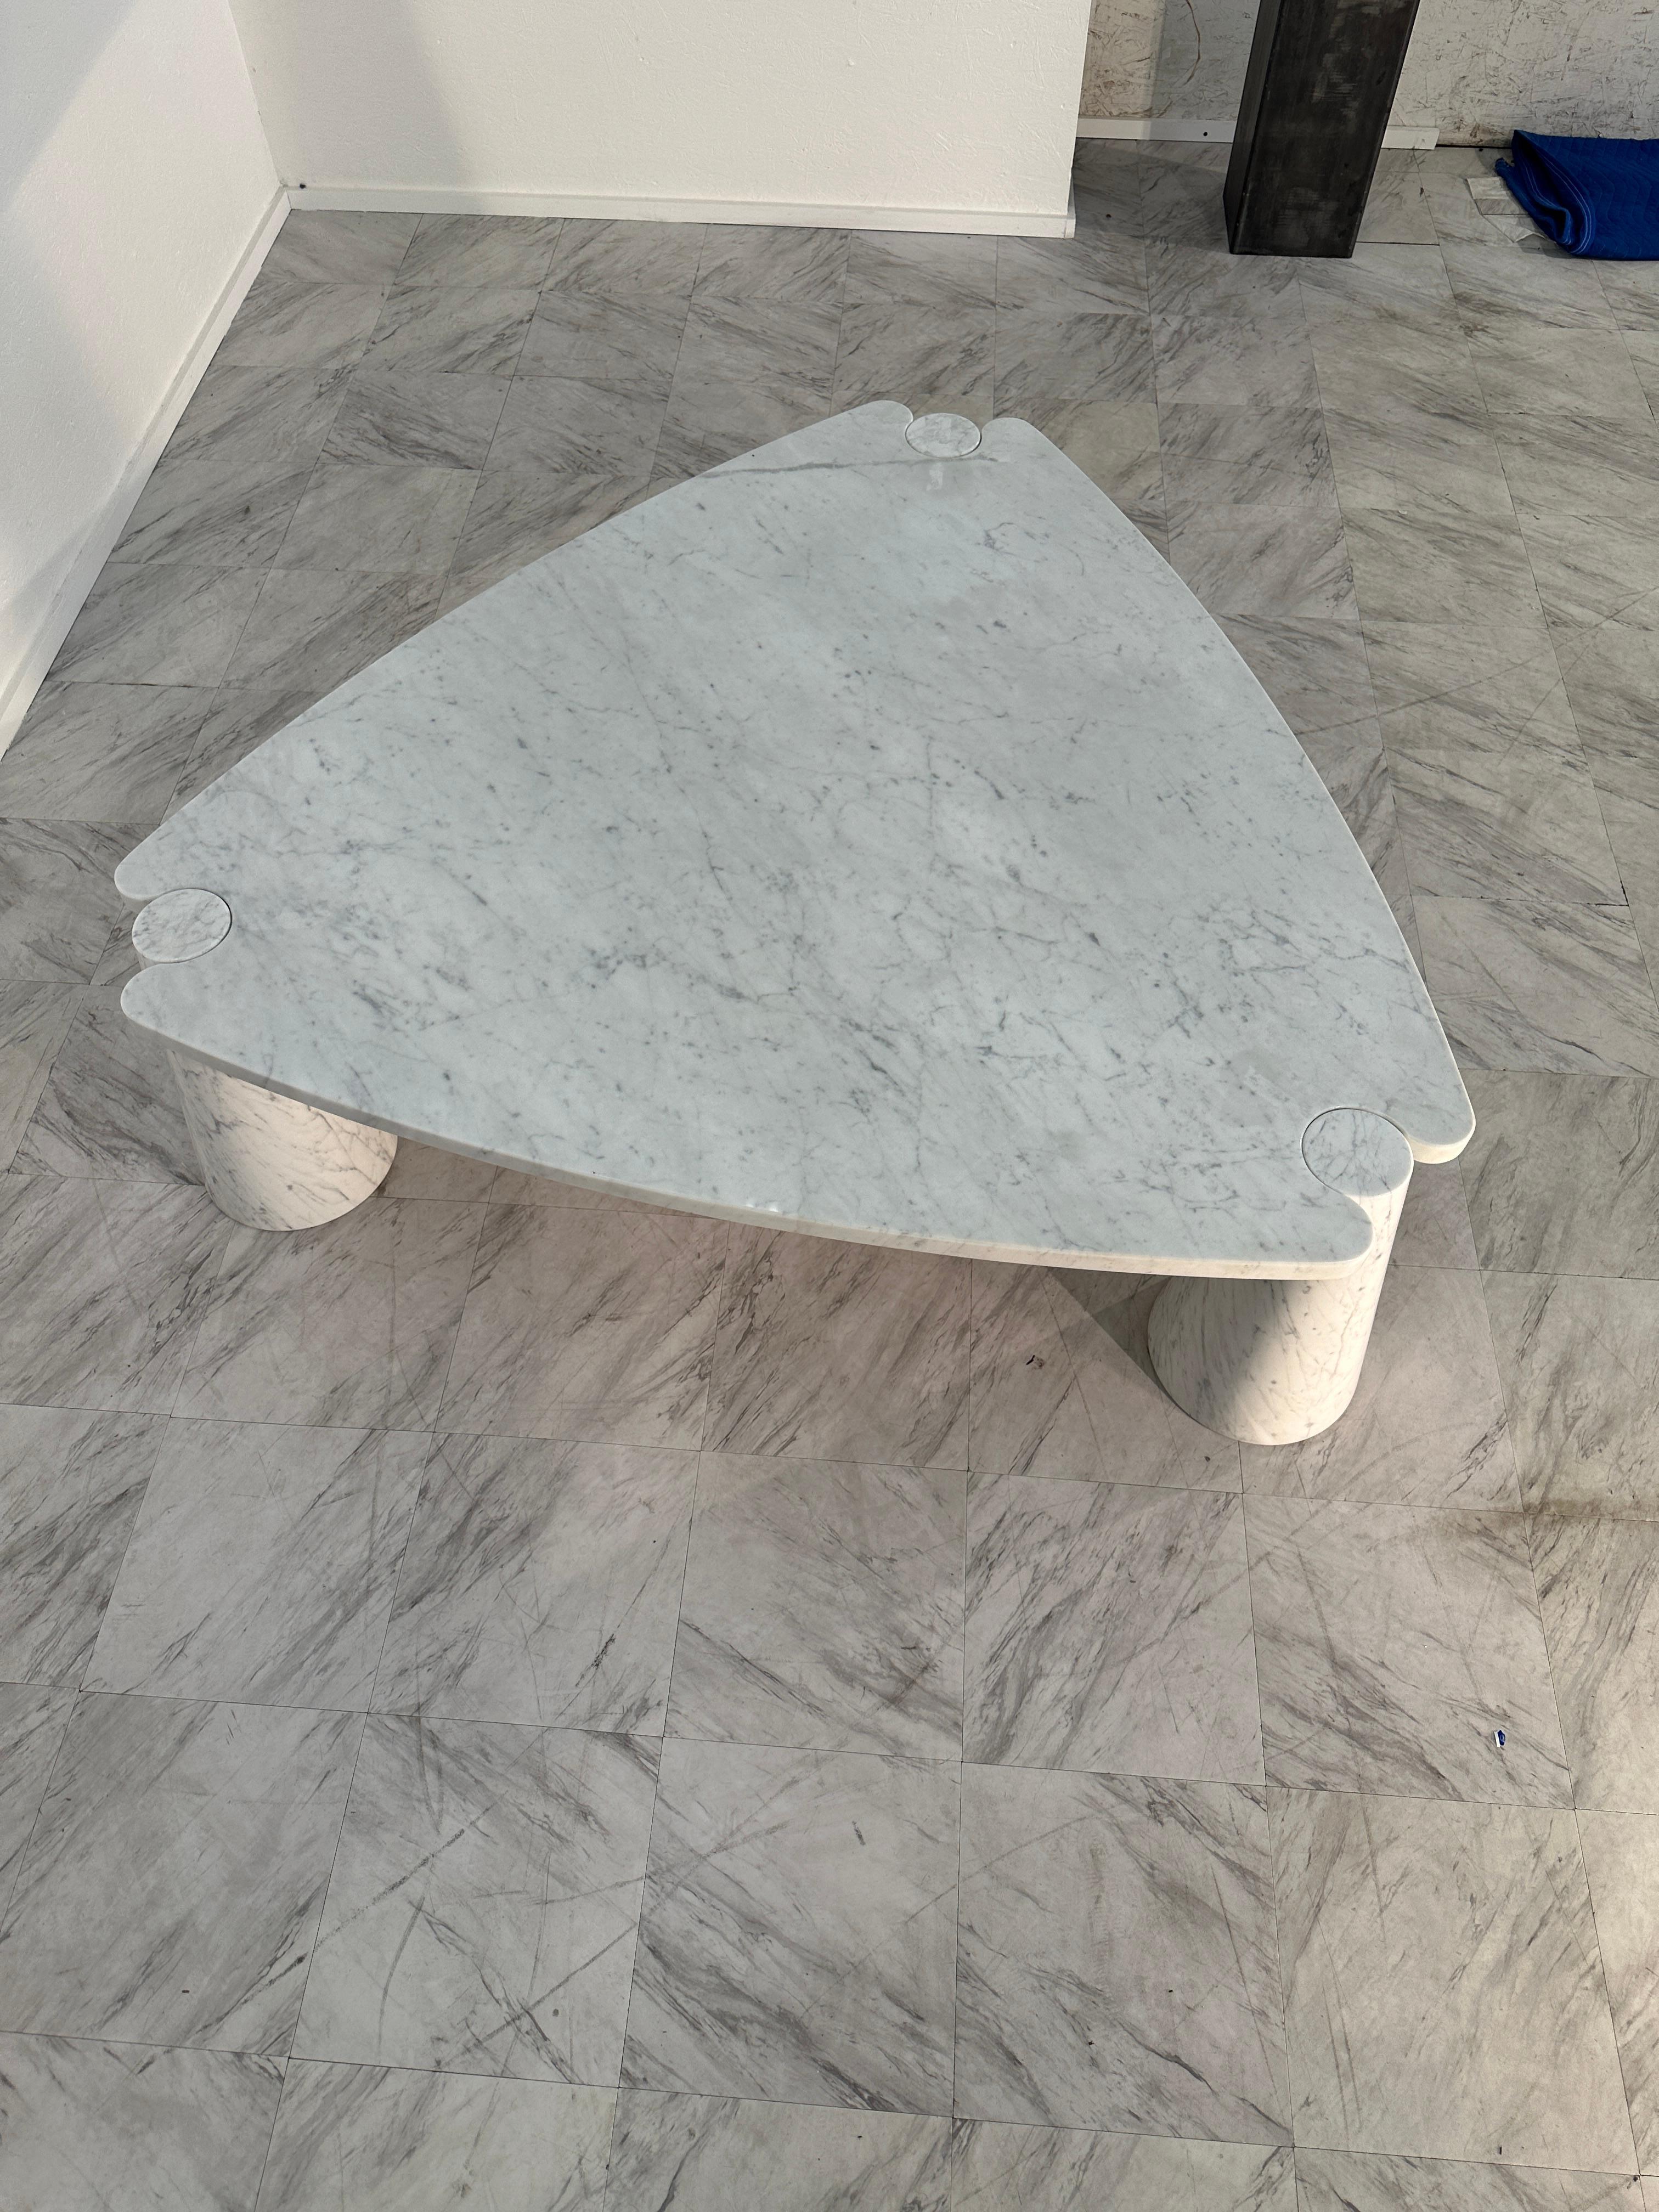 “Eros” series coffee table designed by Angelo Mangiarotti, made of Carrara marble, Italy 1970s.

Angelo Mangiarotti (1921-2012) was an Italian architect and Industrial designer with a reputation to mainly focus on the needs of the users of